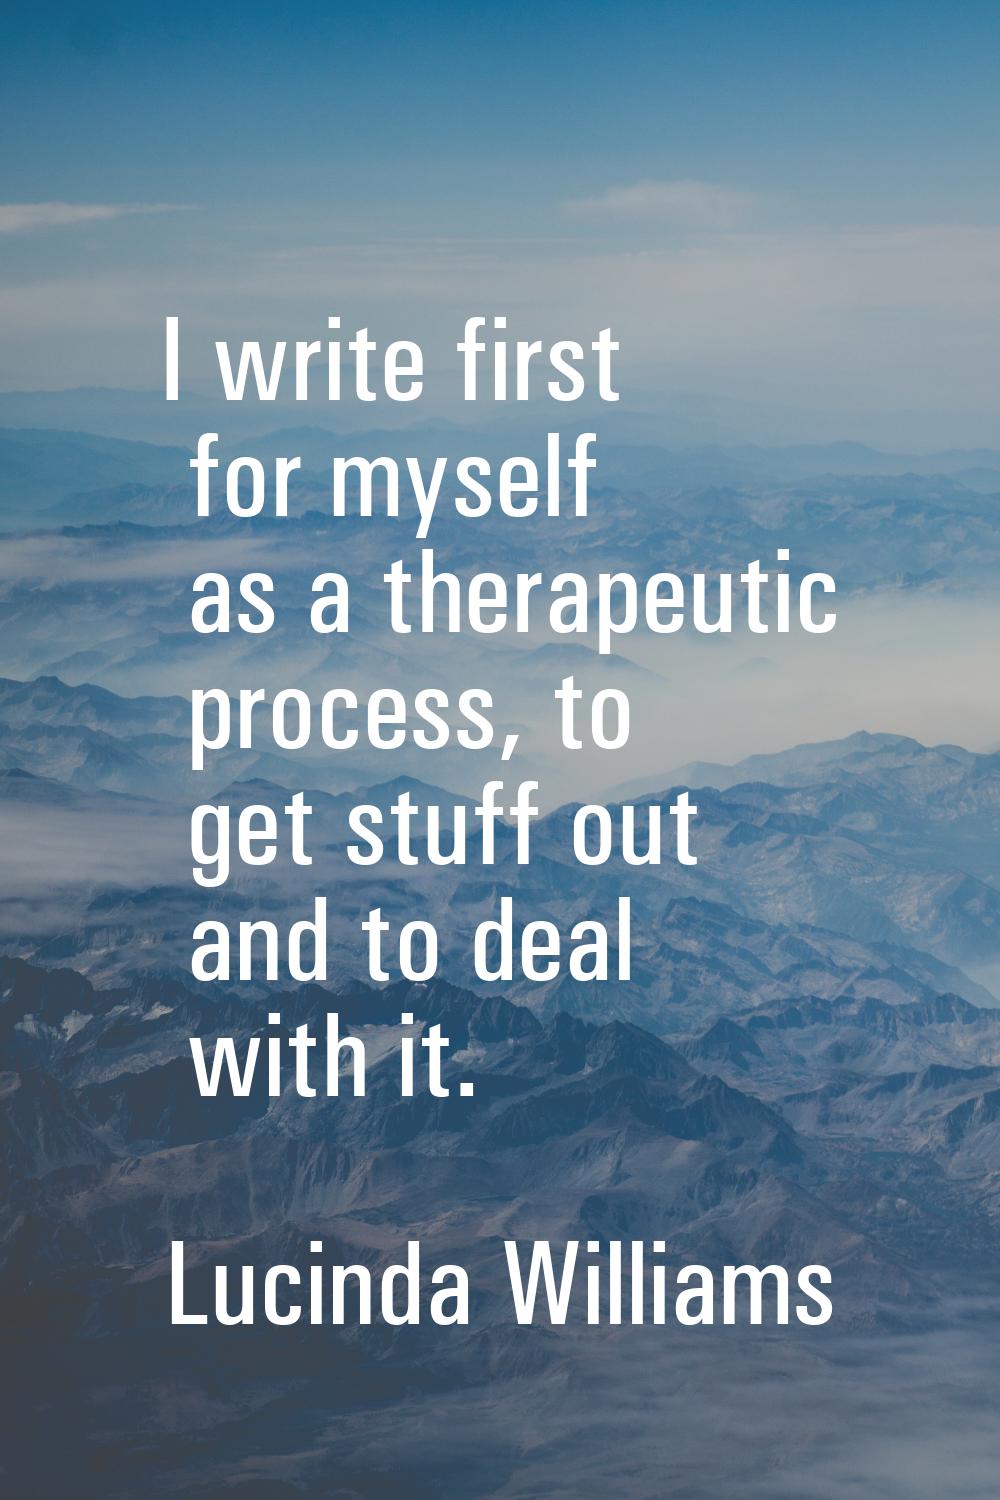 I write first for myself as a therapeutic process, to get stuff out and to deal with it.